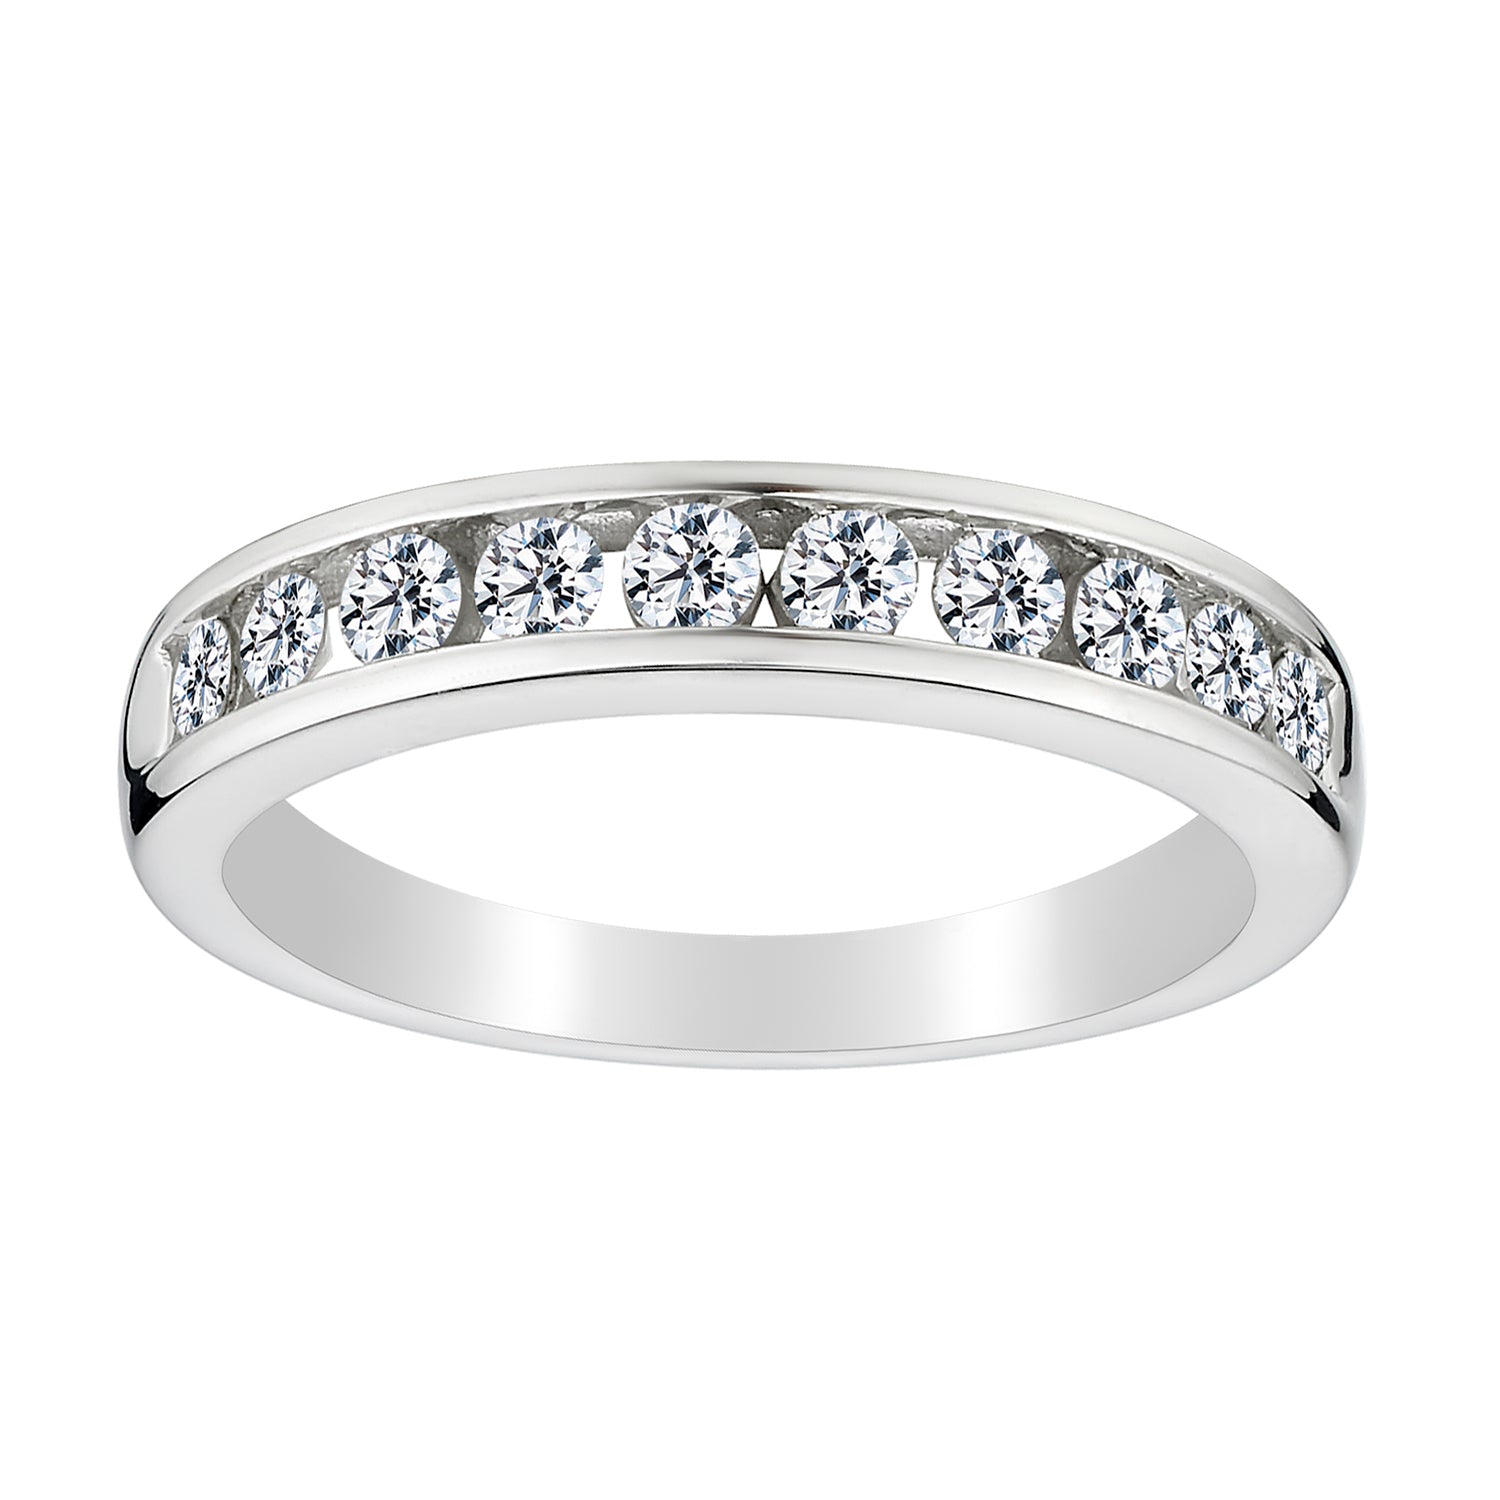 .50 Carat of Diamonds Band Ring, 10kt White Gold…....................NOW